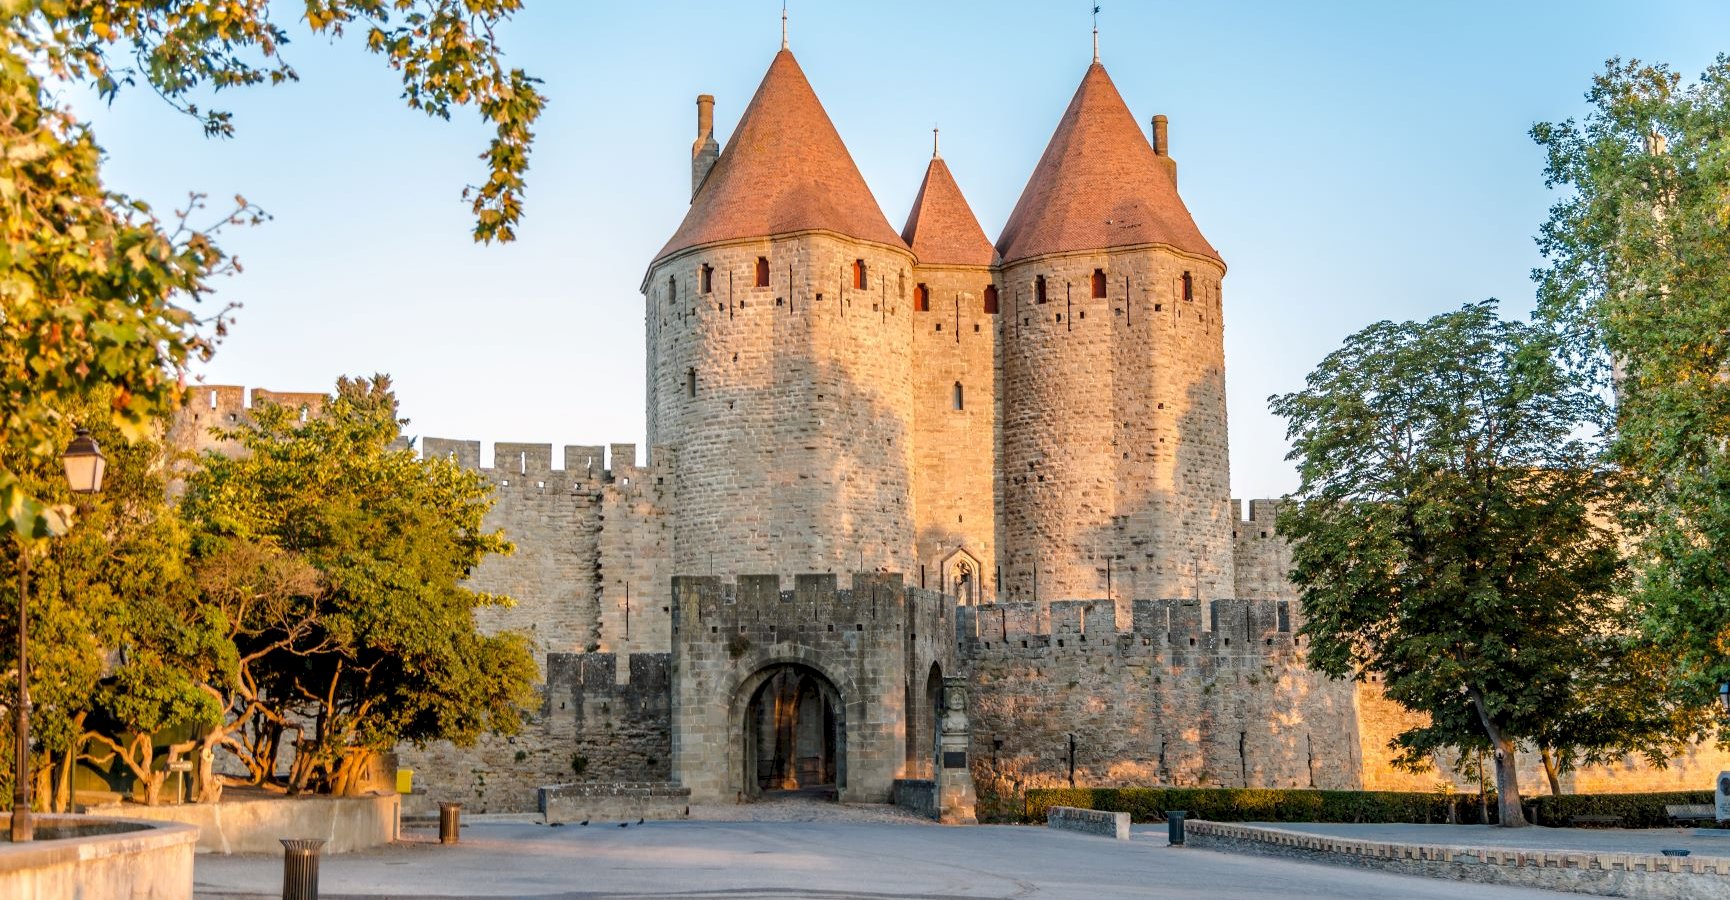 Ophorus Tours - From Sarlat la Canéda to Carcassonne Private Transfer